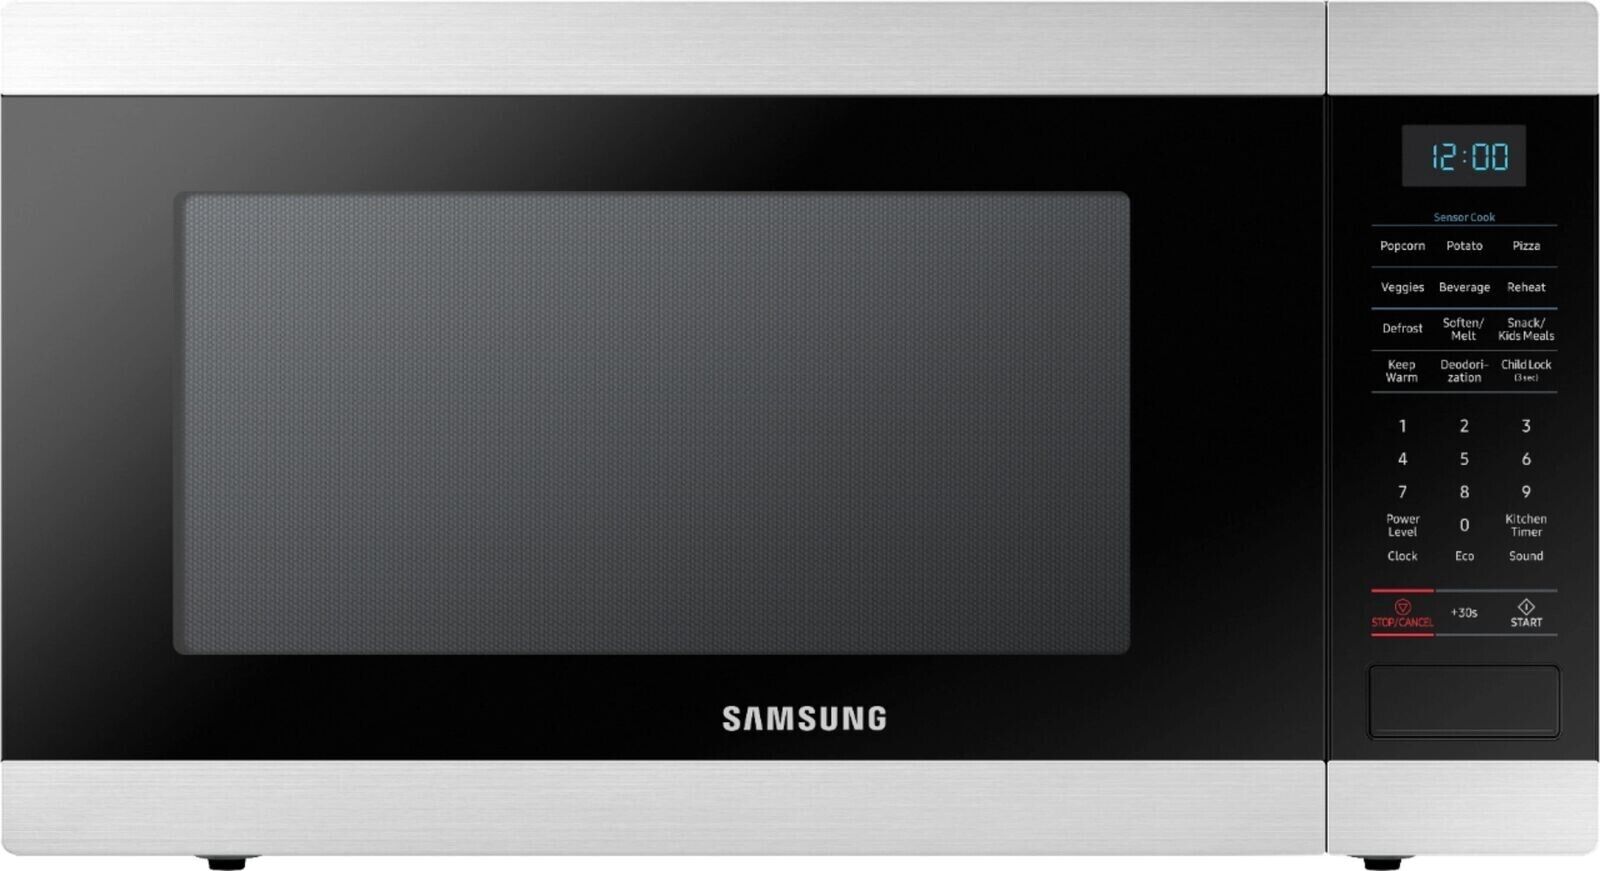 Samsung MS19M8000AS 1.9 Cu. Ft. Countertop Microwave with Se